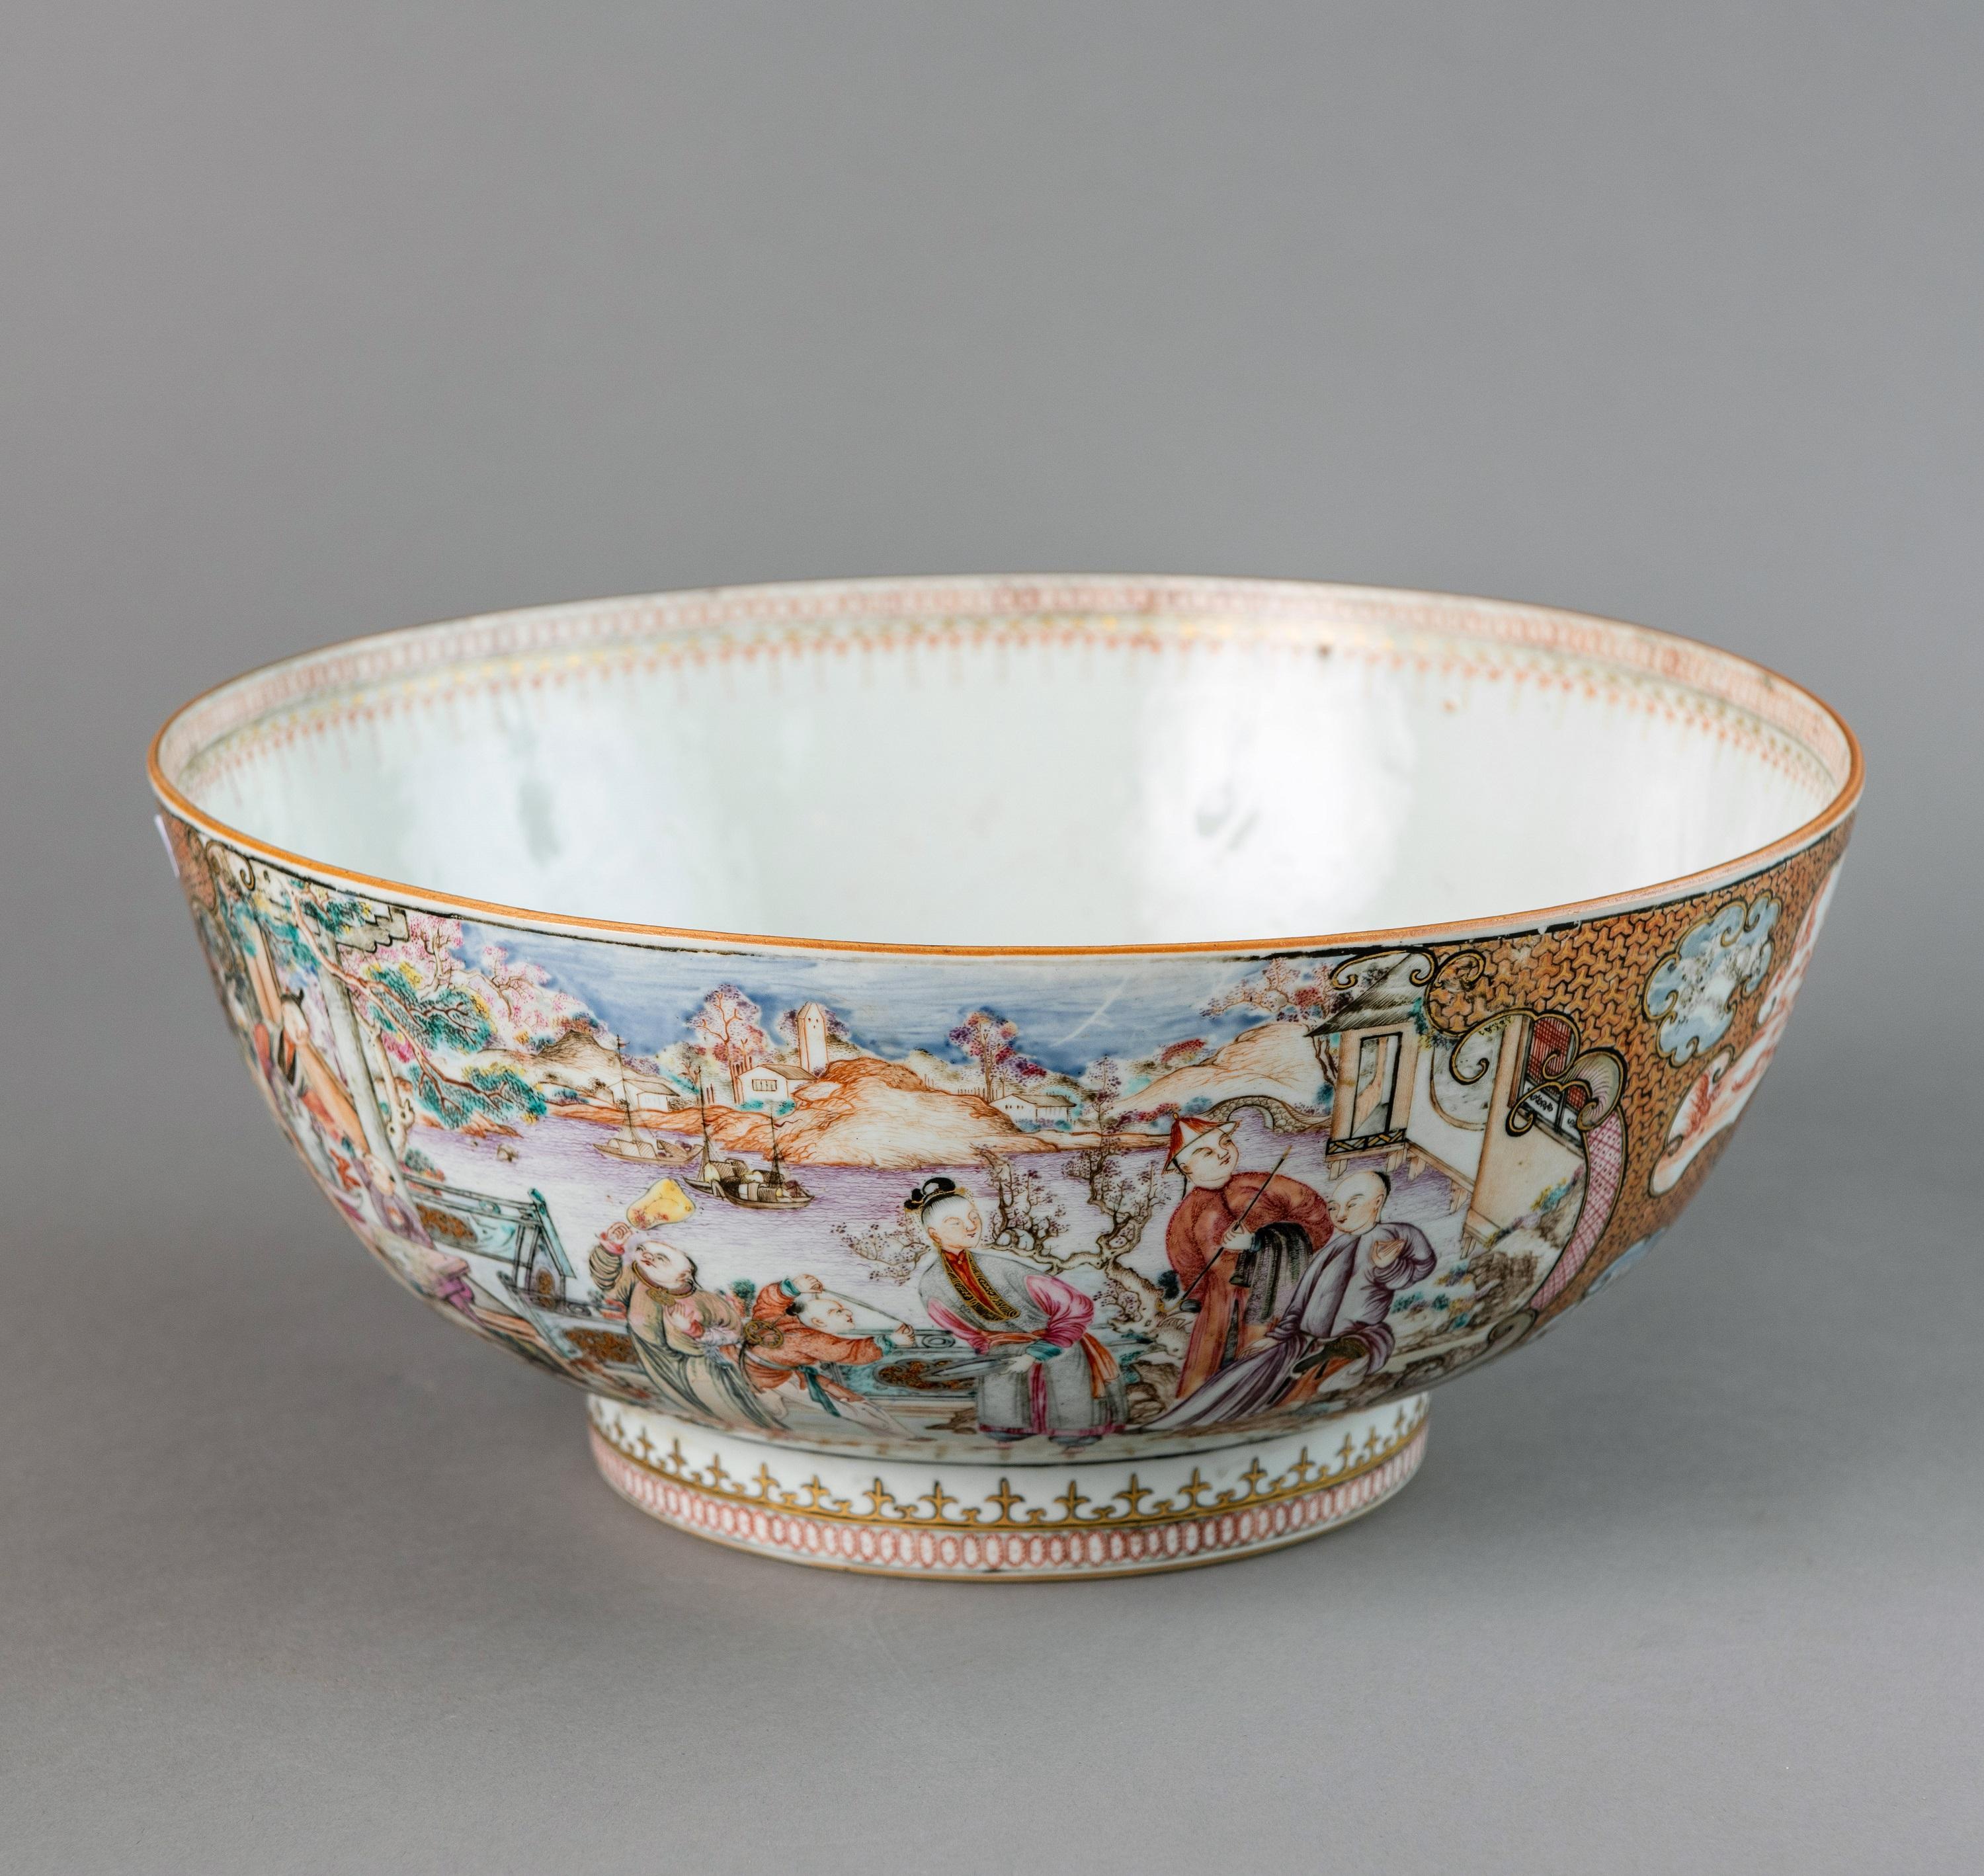 Mandarin pattern. Chinese export punch bowl with footed rim.